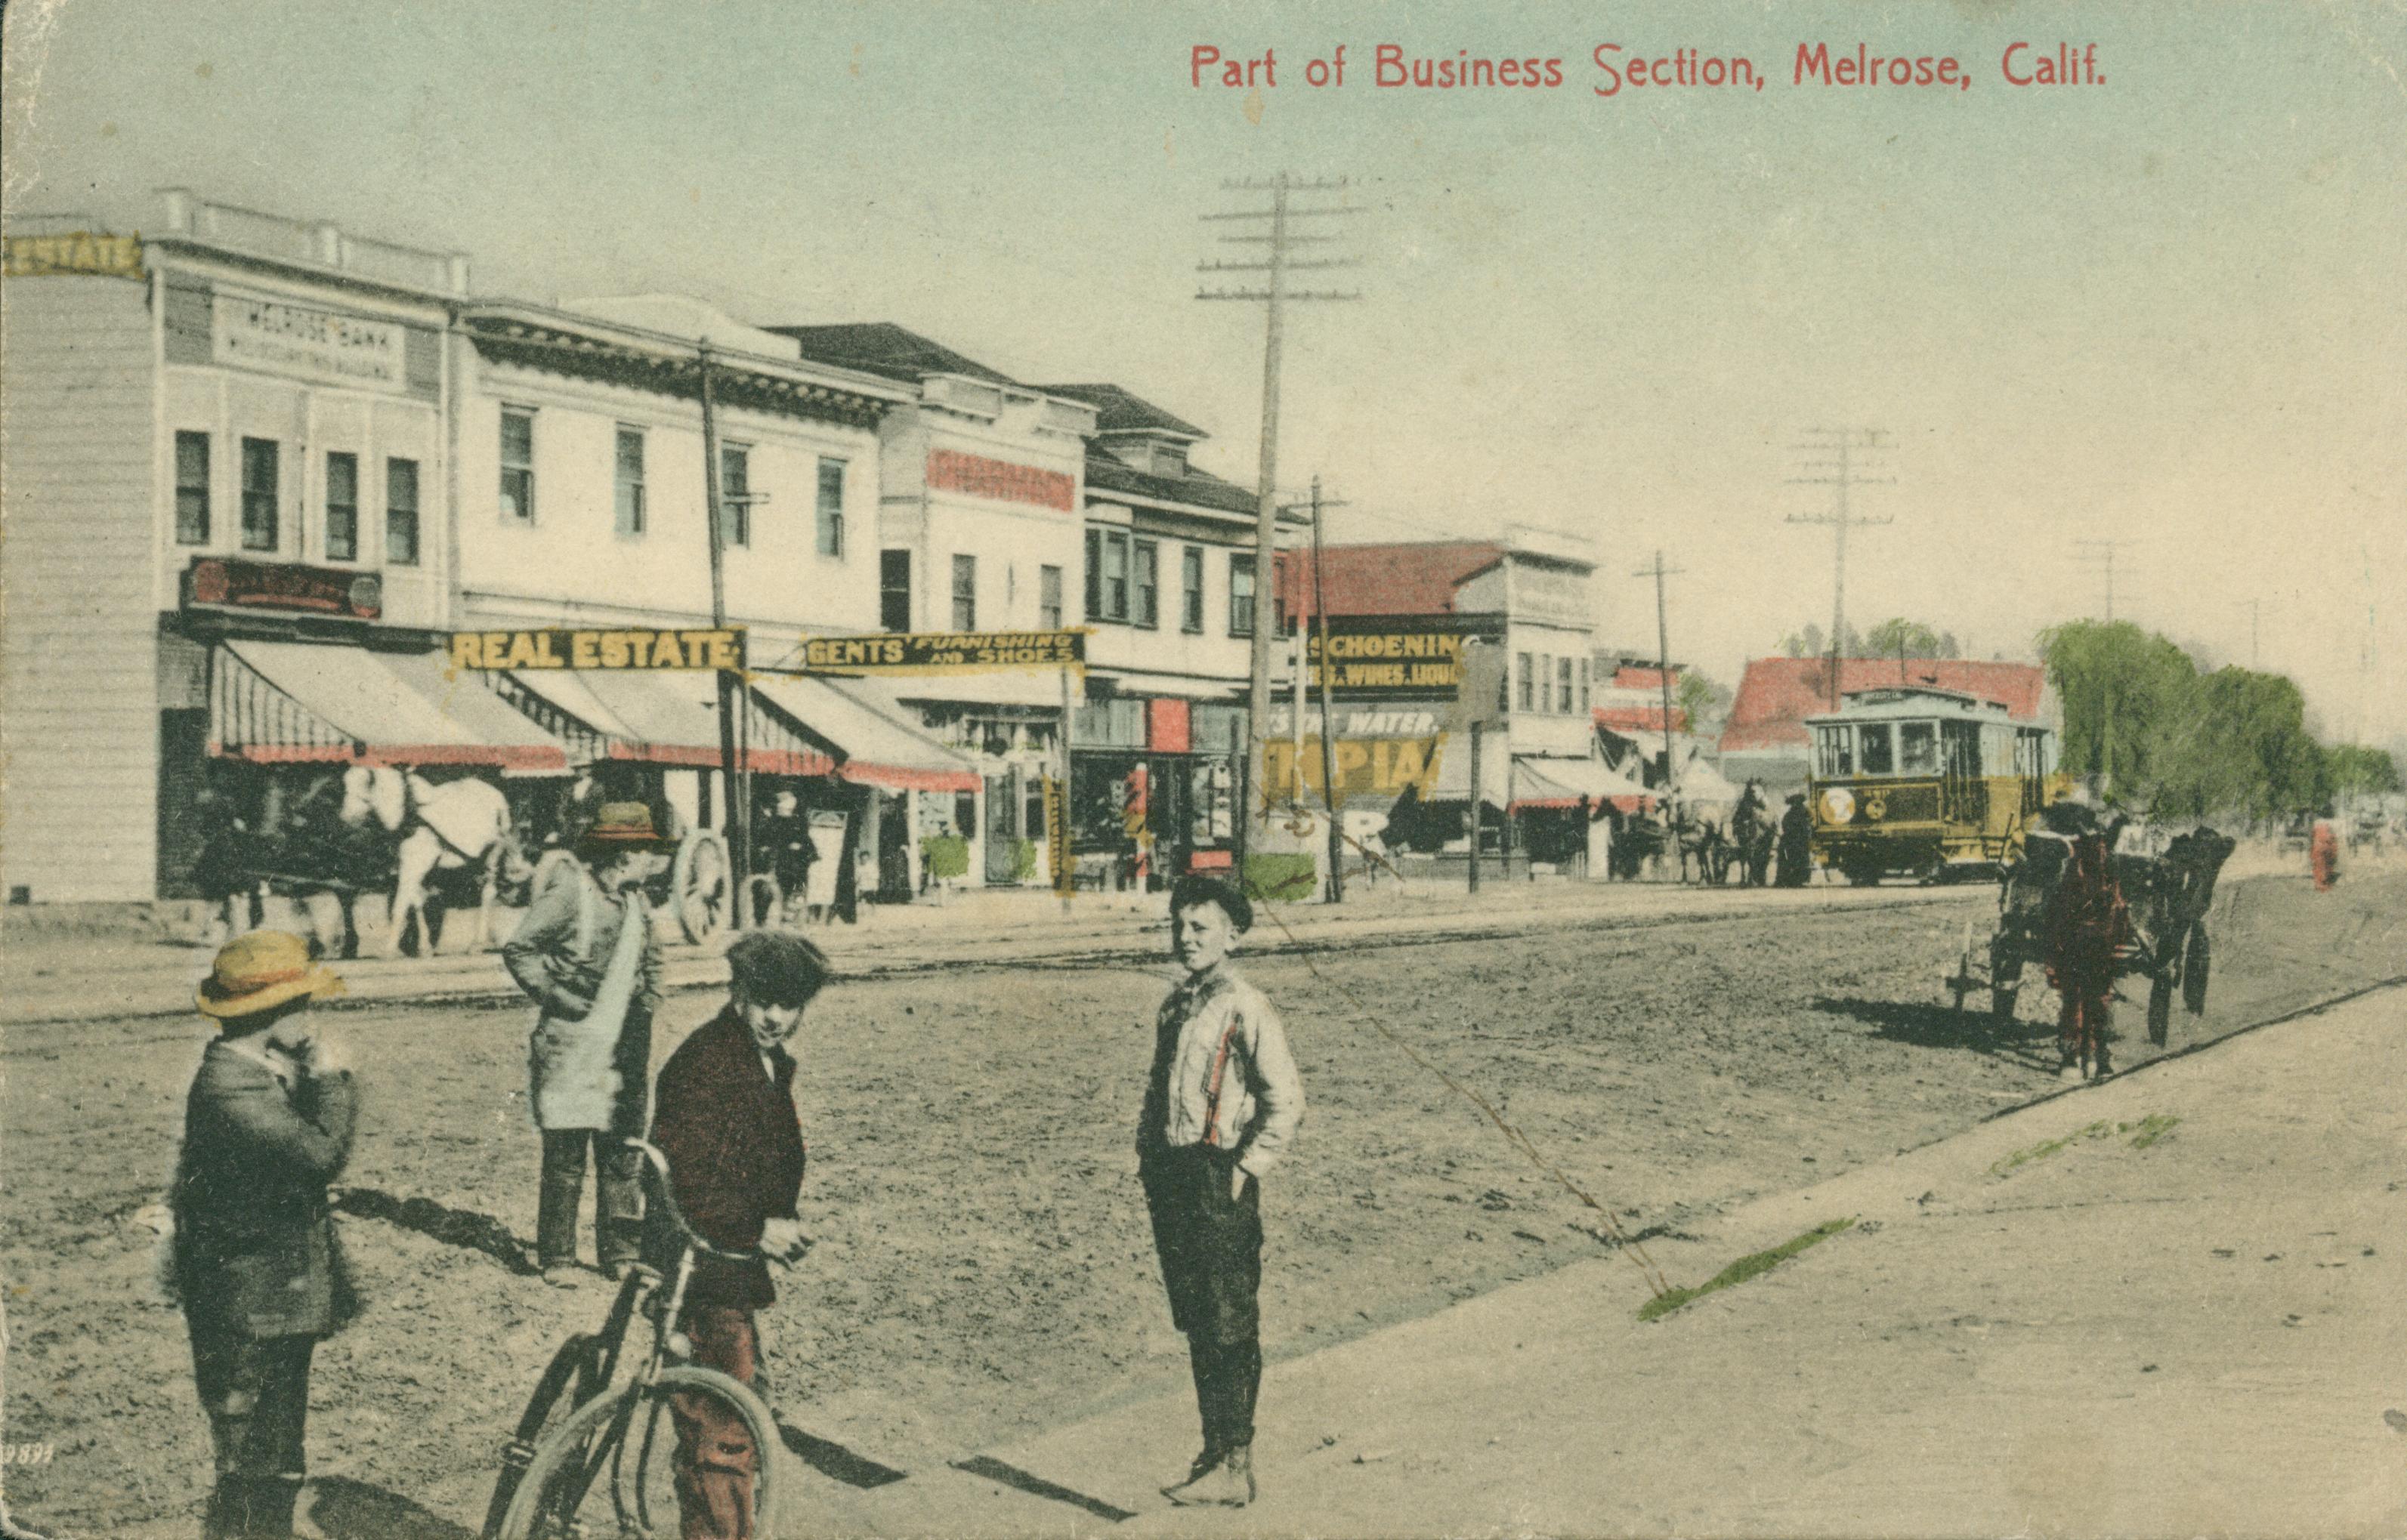 Shows four boys standing on a street in Melrose with businesses in the background